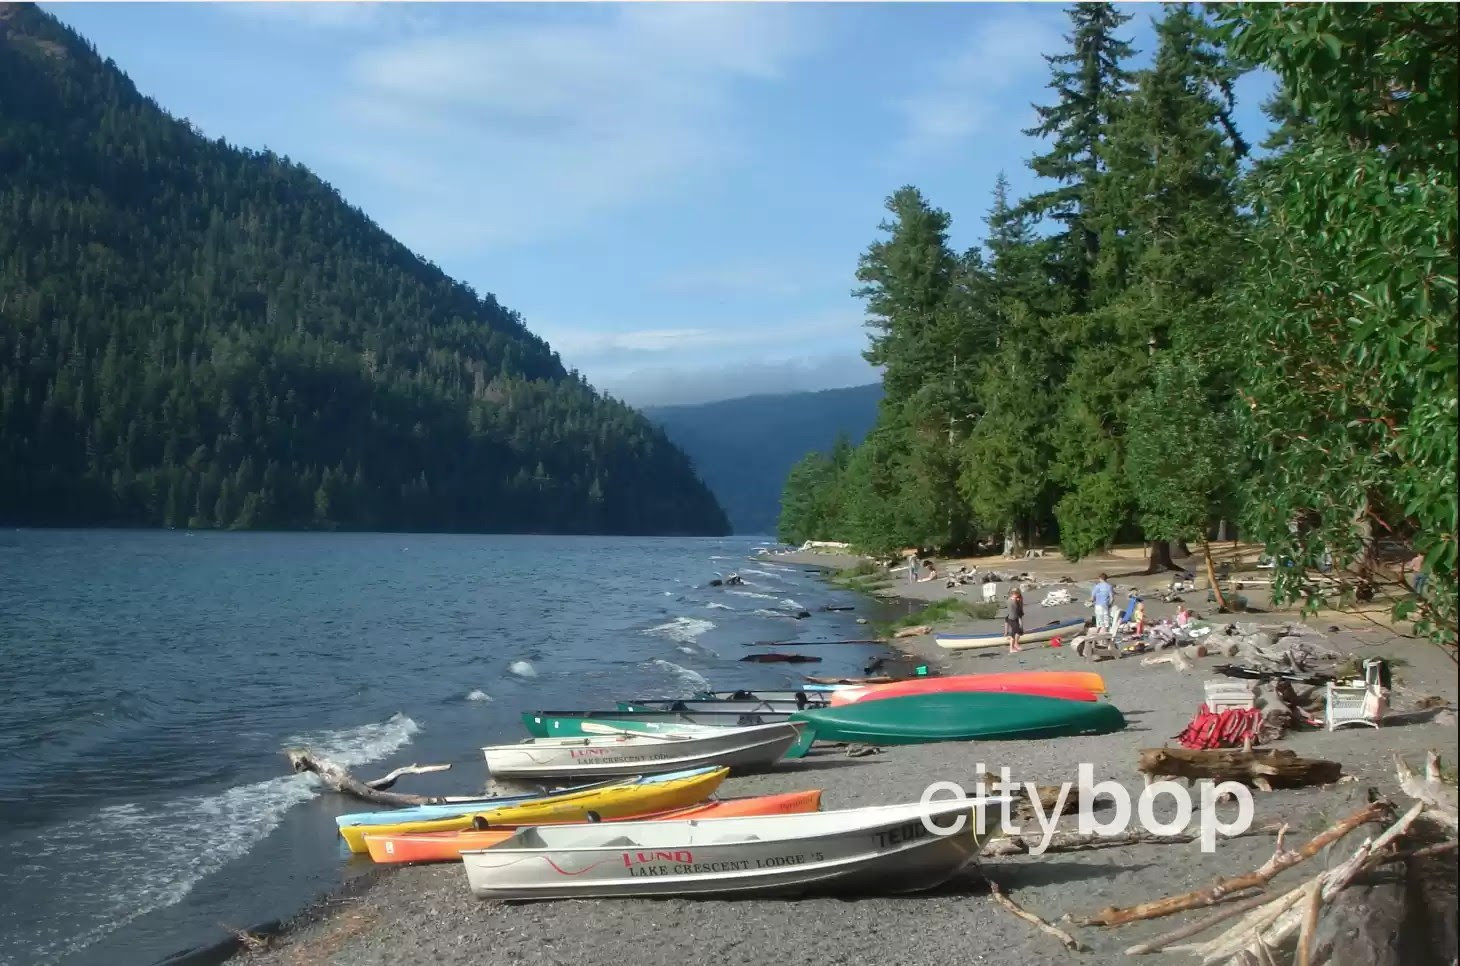 10 BEST Things to Do at Lake Crescent